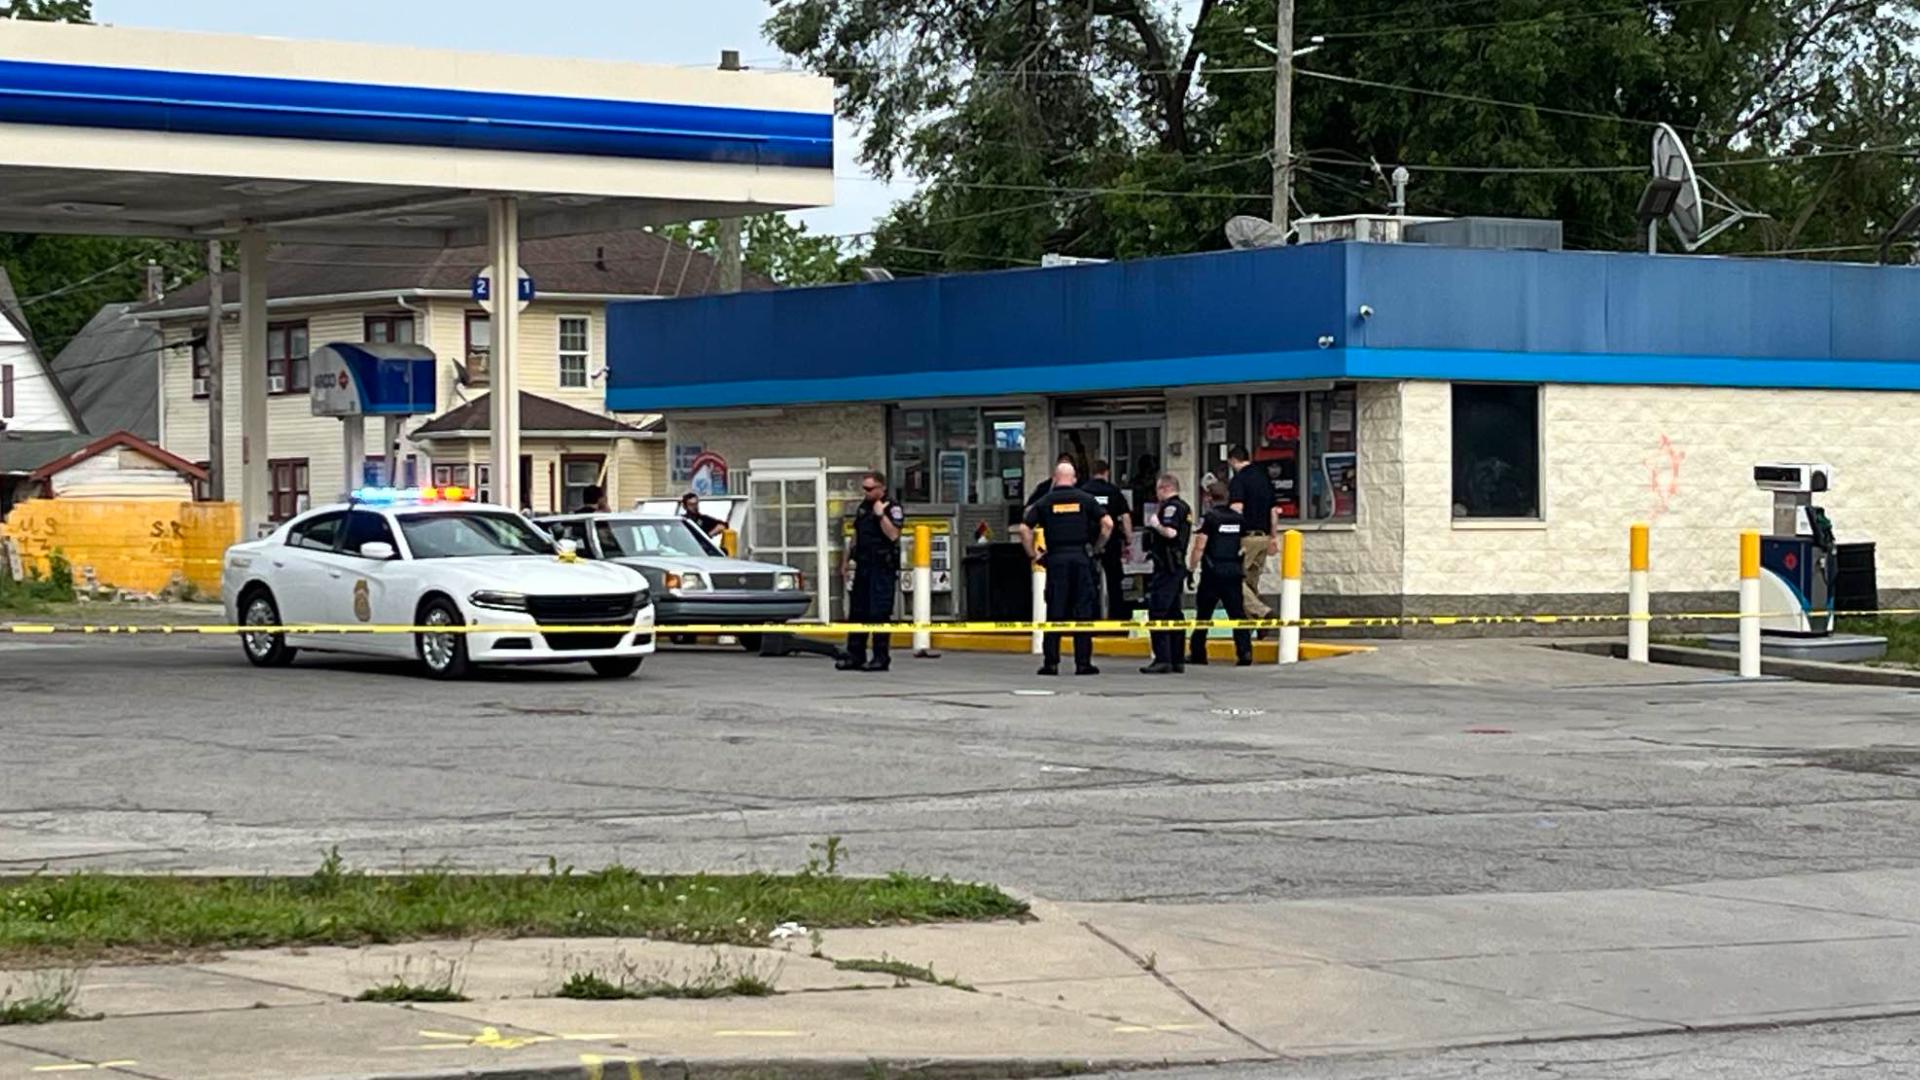 The shooting happened shortly after 6:30 p.m. Wednesday in the 2900 block of East 10th Street.